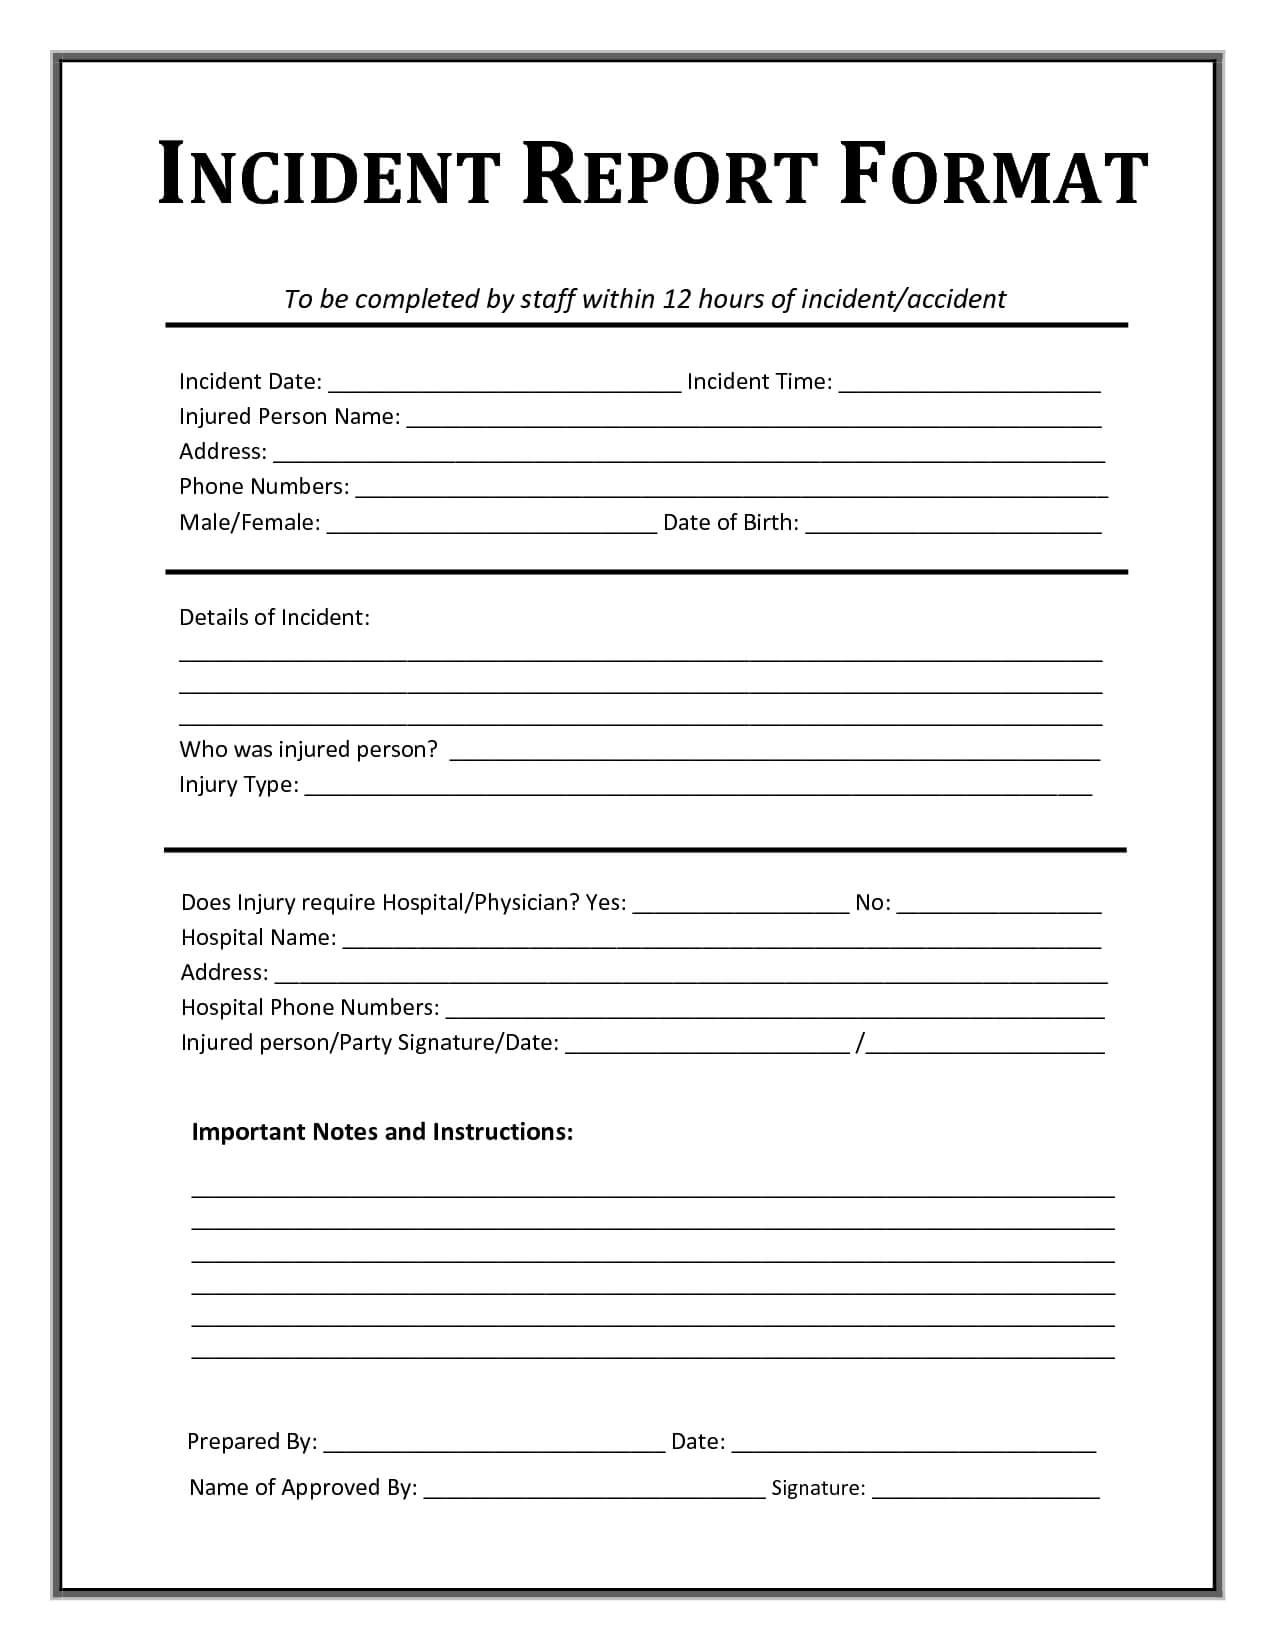 Incident Report Template | Incident Report Form, Incident In Injury Report Form Template